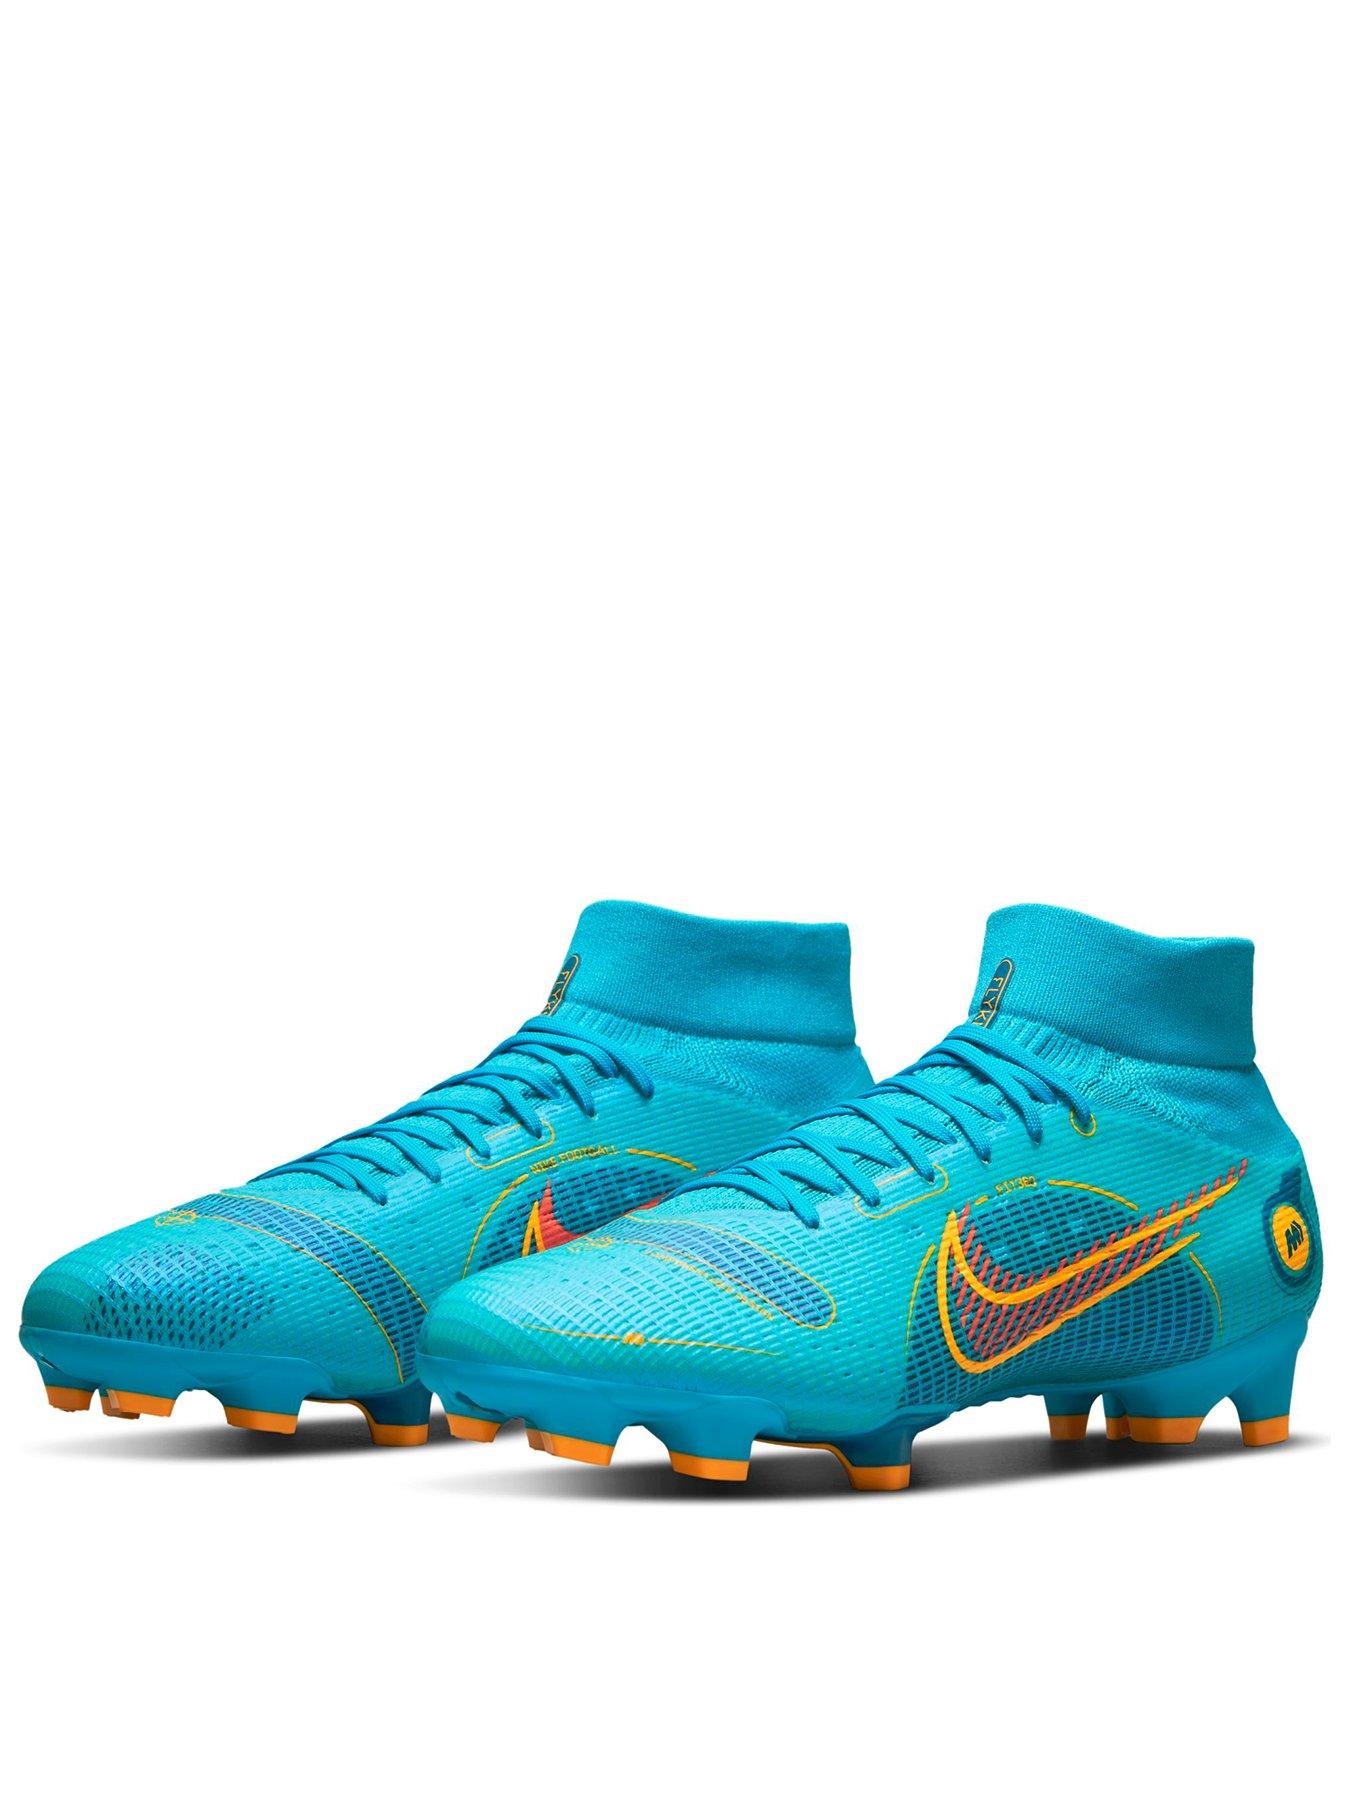 Men Mercurial Superfly 8 Pro Firm Ground Football Boots - Blue